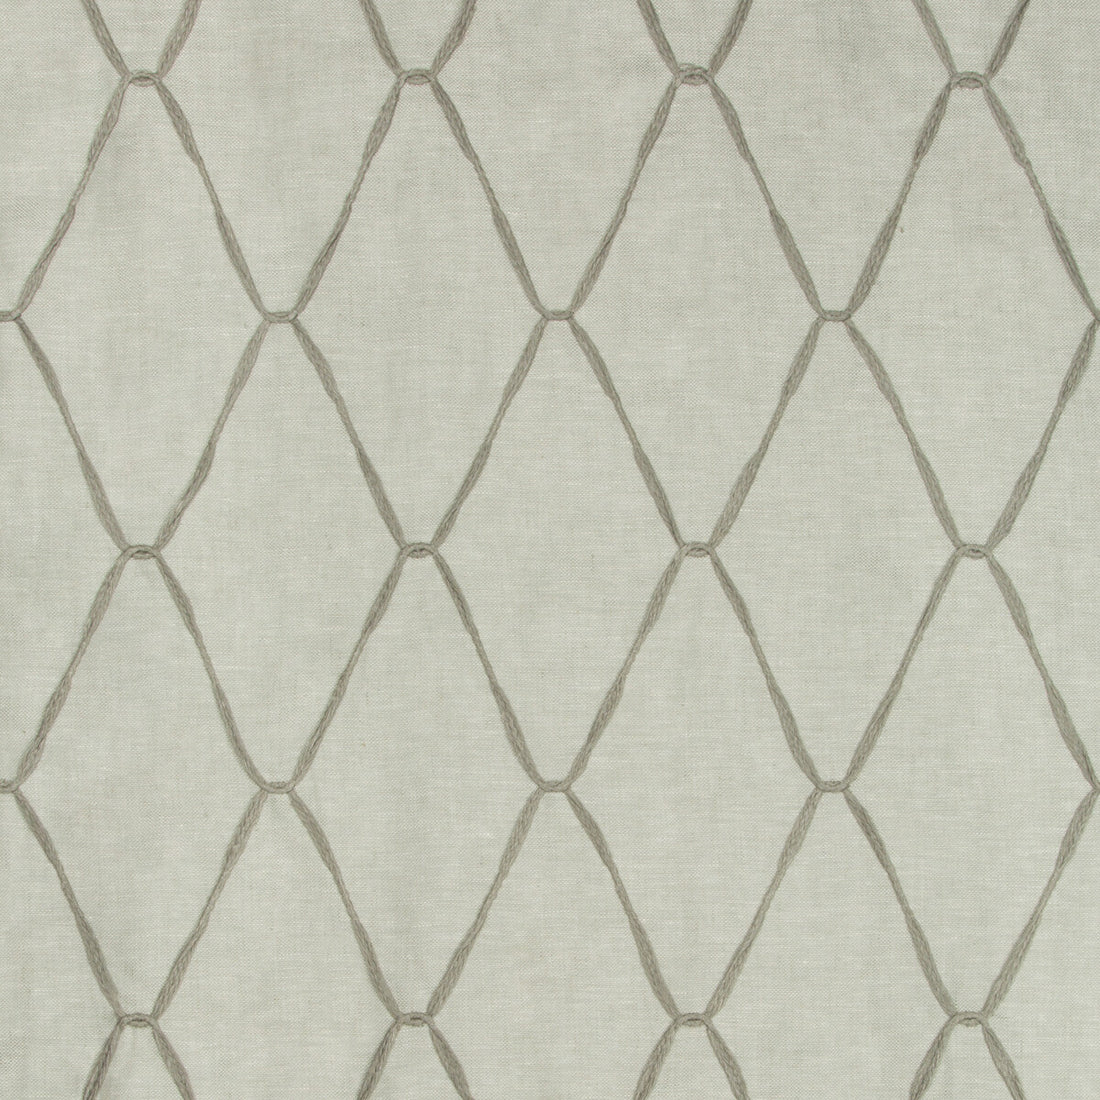 Looped Ribbons fabric in mist color - pattern 4476.11.0 - by Kravet Couture in the Sue Firestone Malibu collection